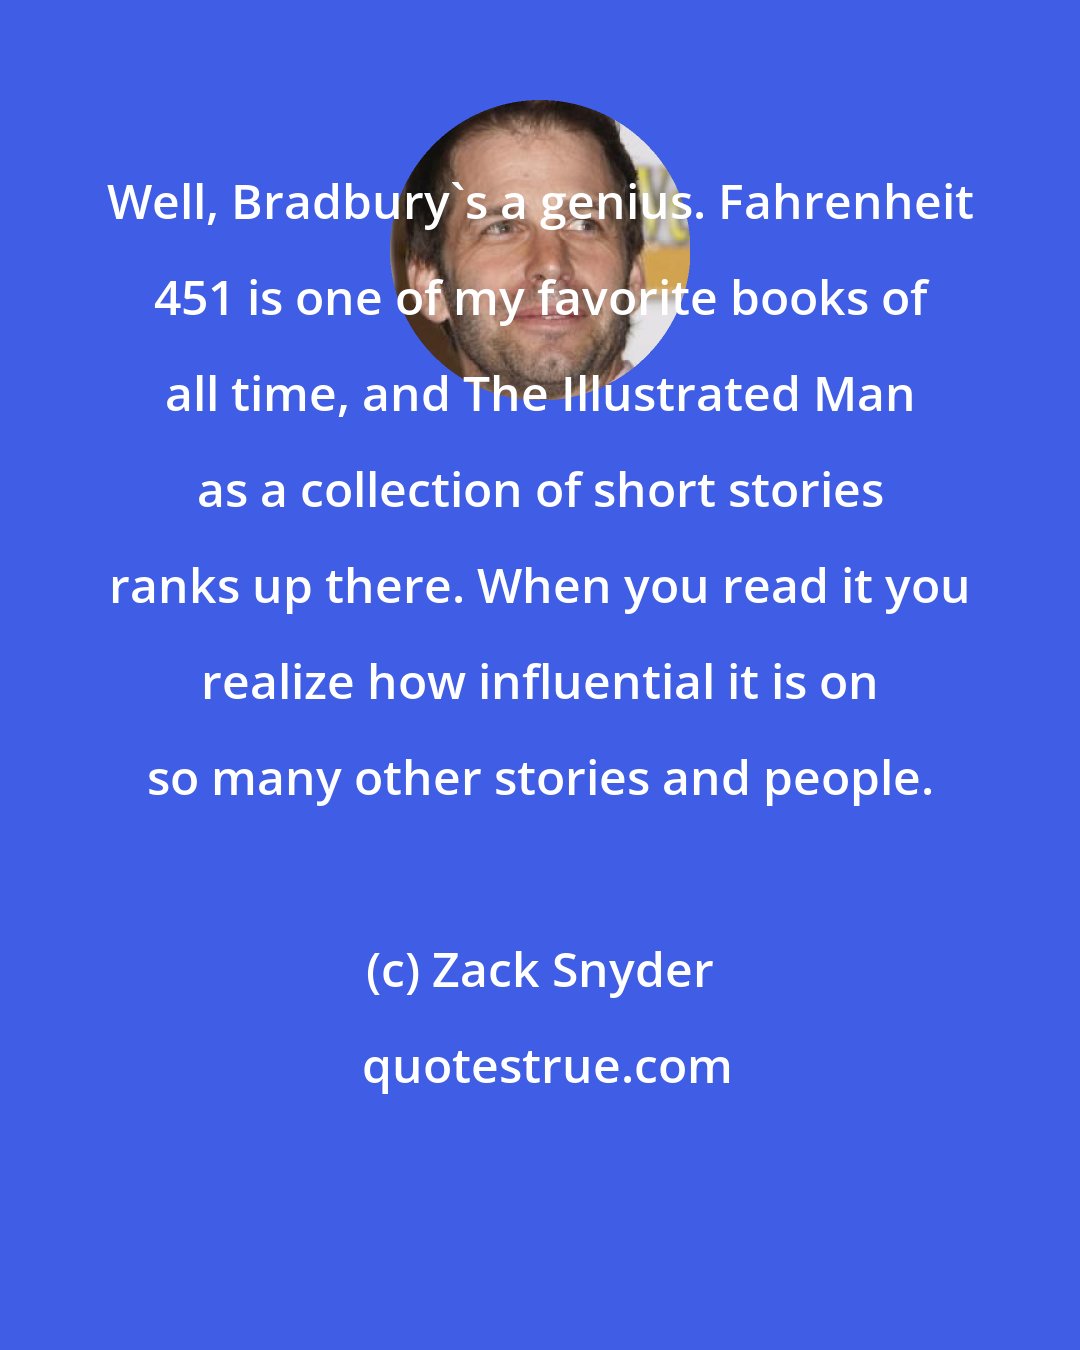 Zack Snyder: Well, Bradbury's a genius. Fahrenheit 451 is one of my favorite books of all time, and The Illustrated Man as a collection of short stories ranks up there. When you read it you realize how influential it is on so many other stories and people.